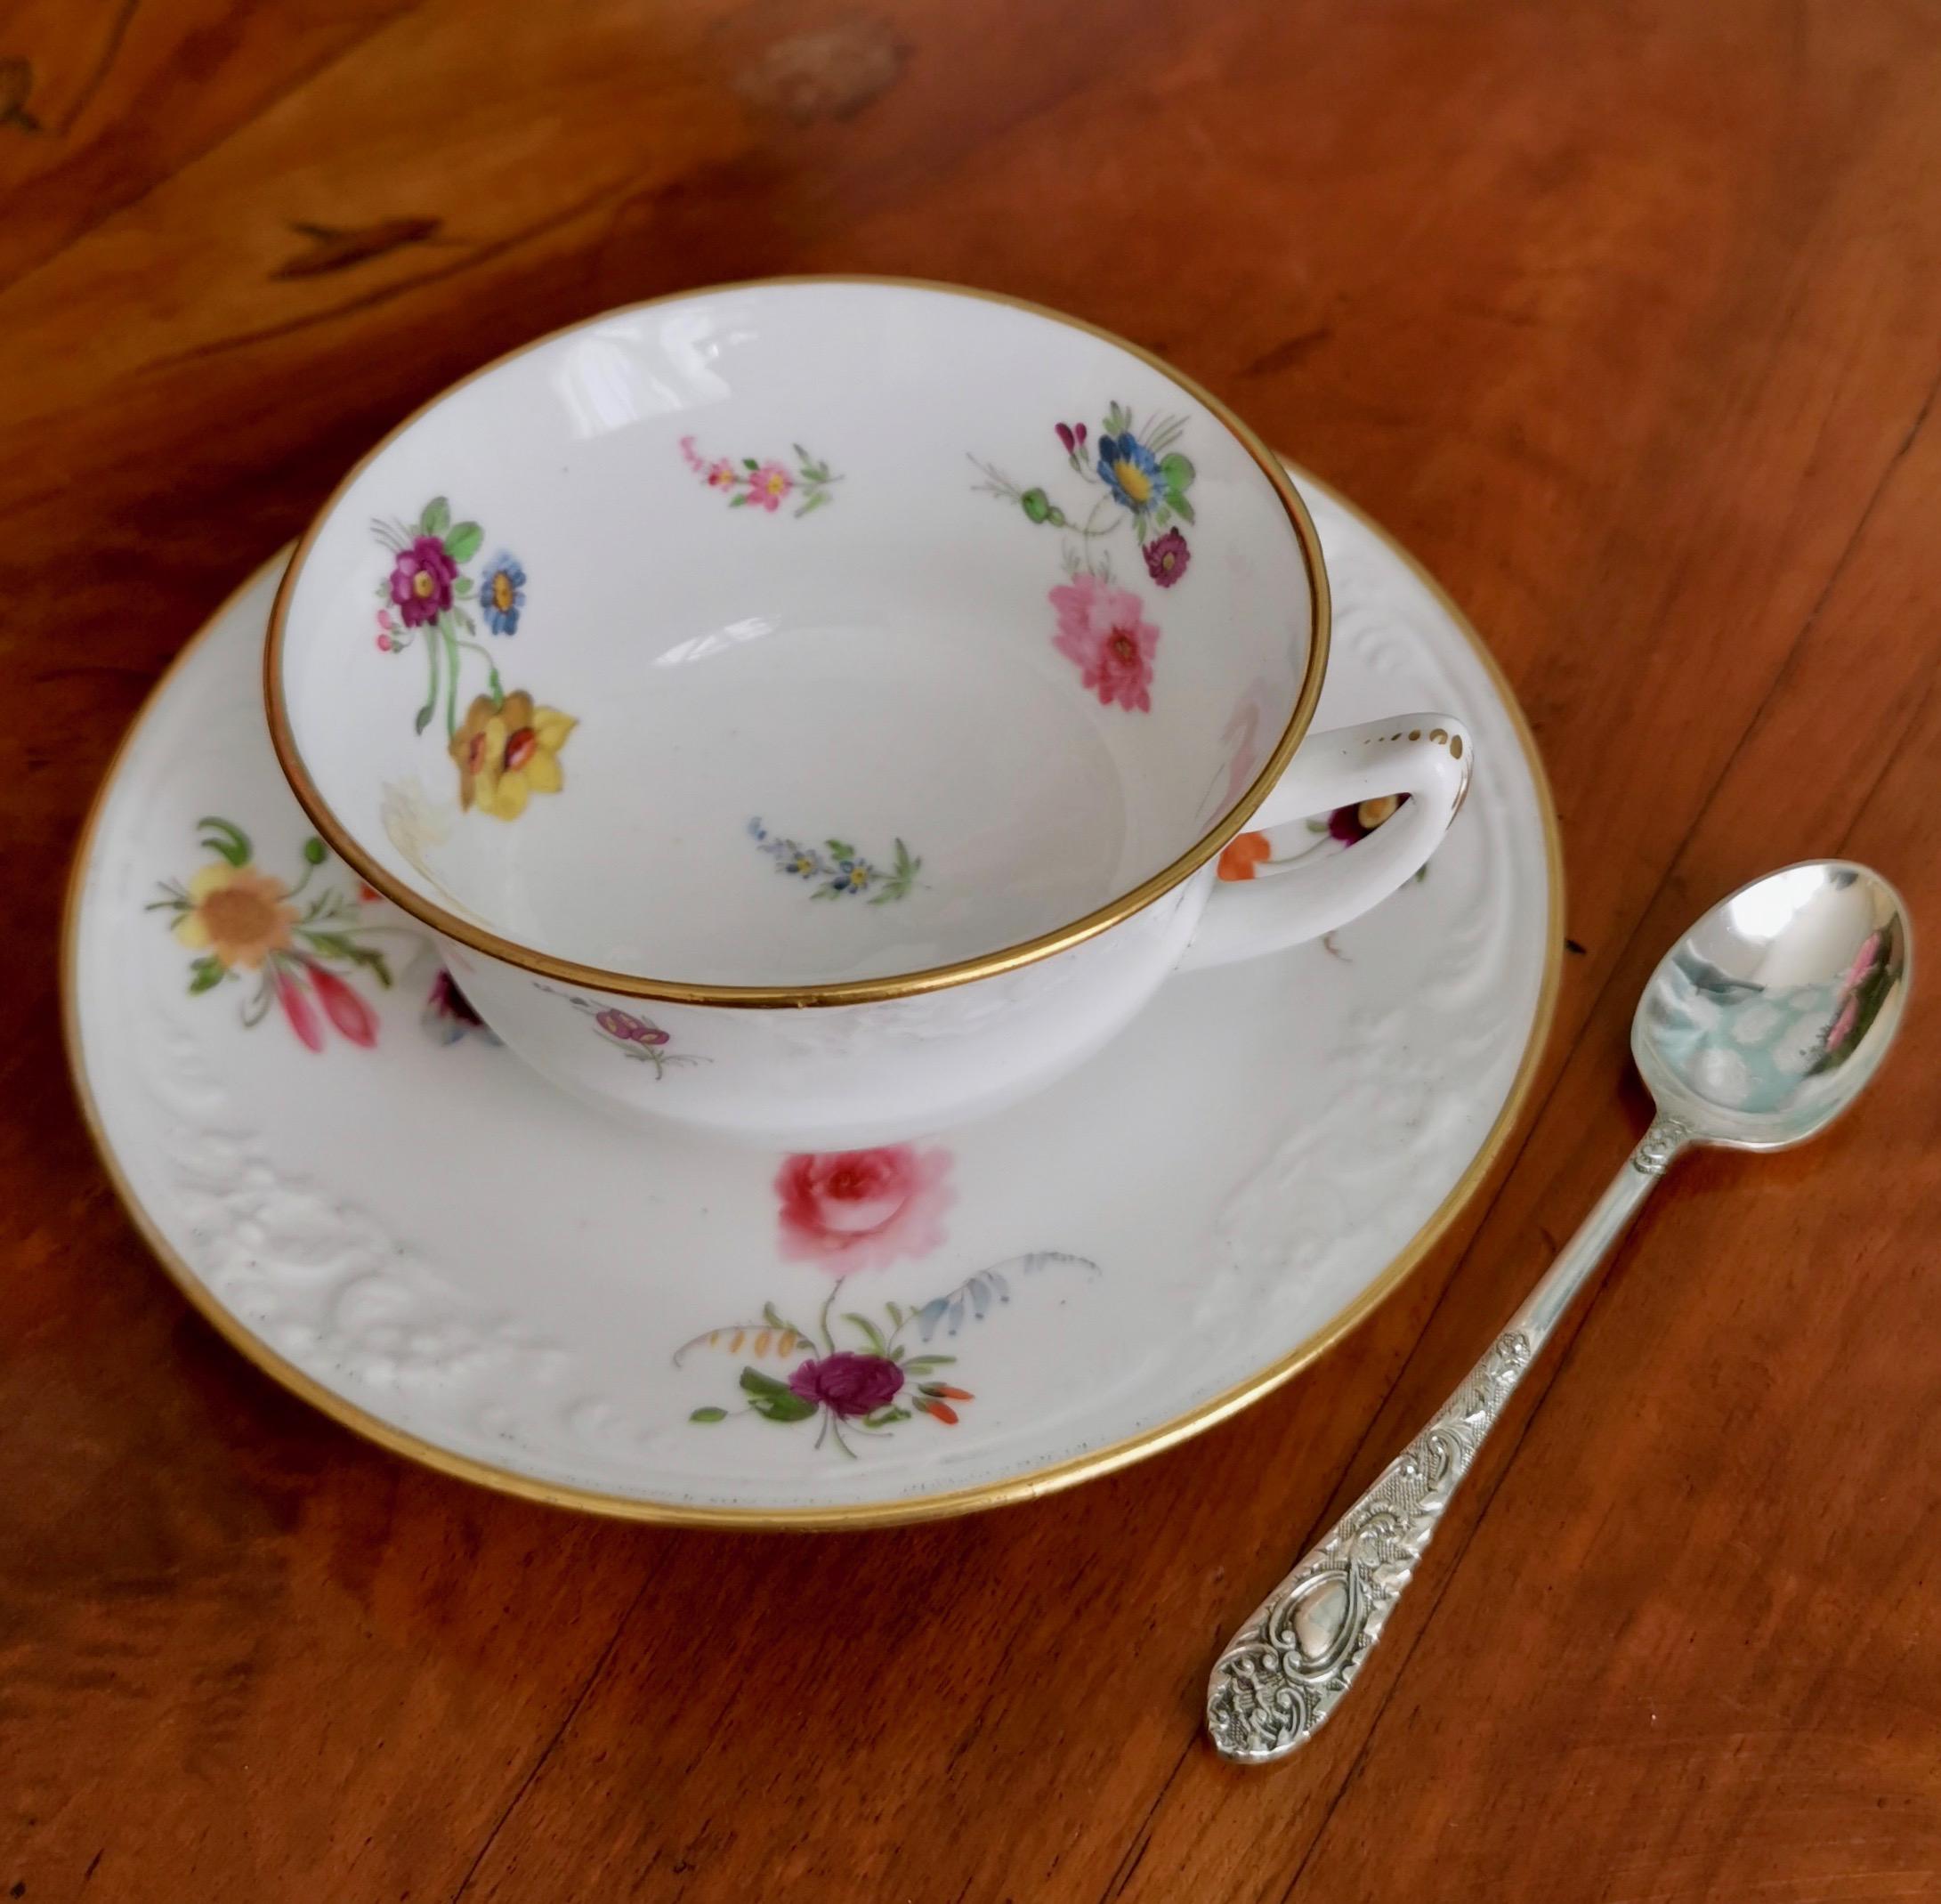 This is a very fine teacup and saucer made by Davenport circa 1820.

This little cup would make a perfect Valentine's Day gift!

Davenport was one of the pioneers of English china production alongside other great potters such as Spode, ridgway,